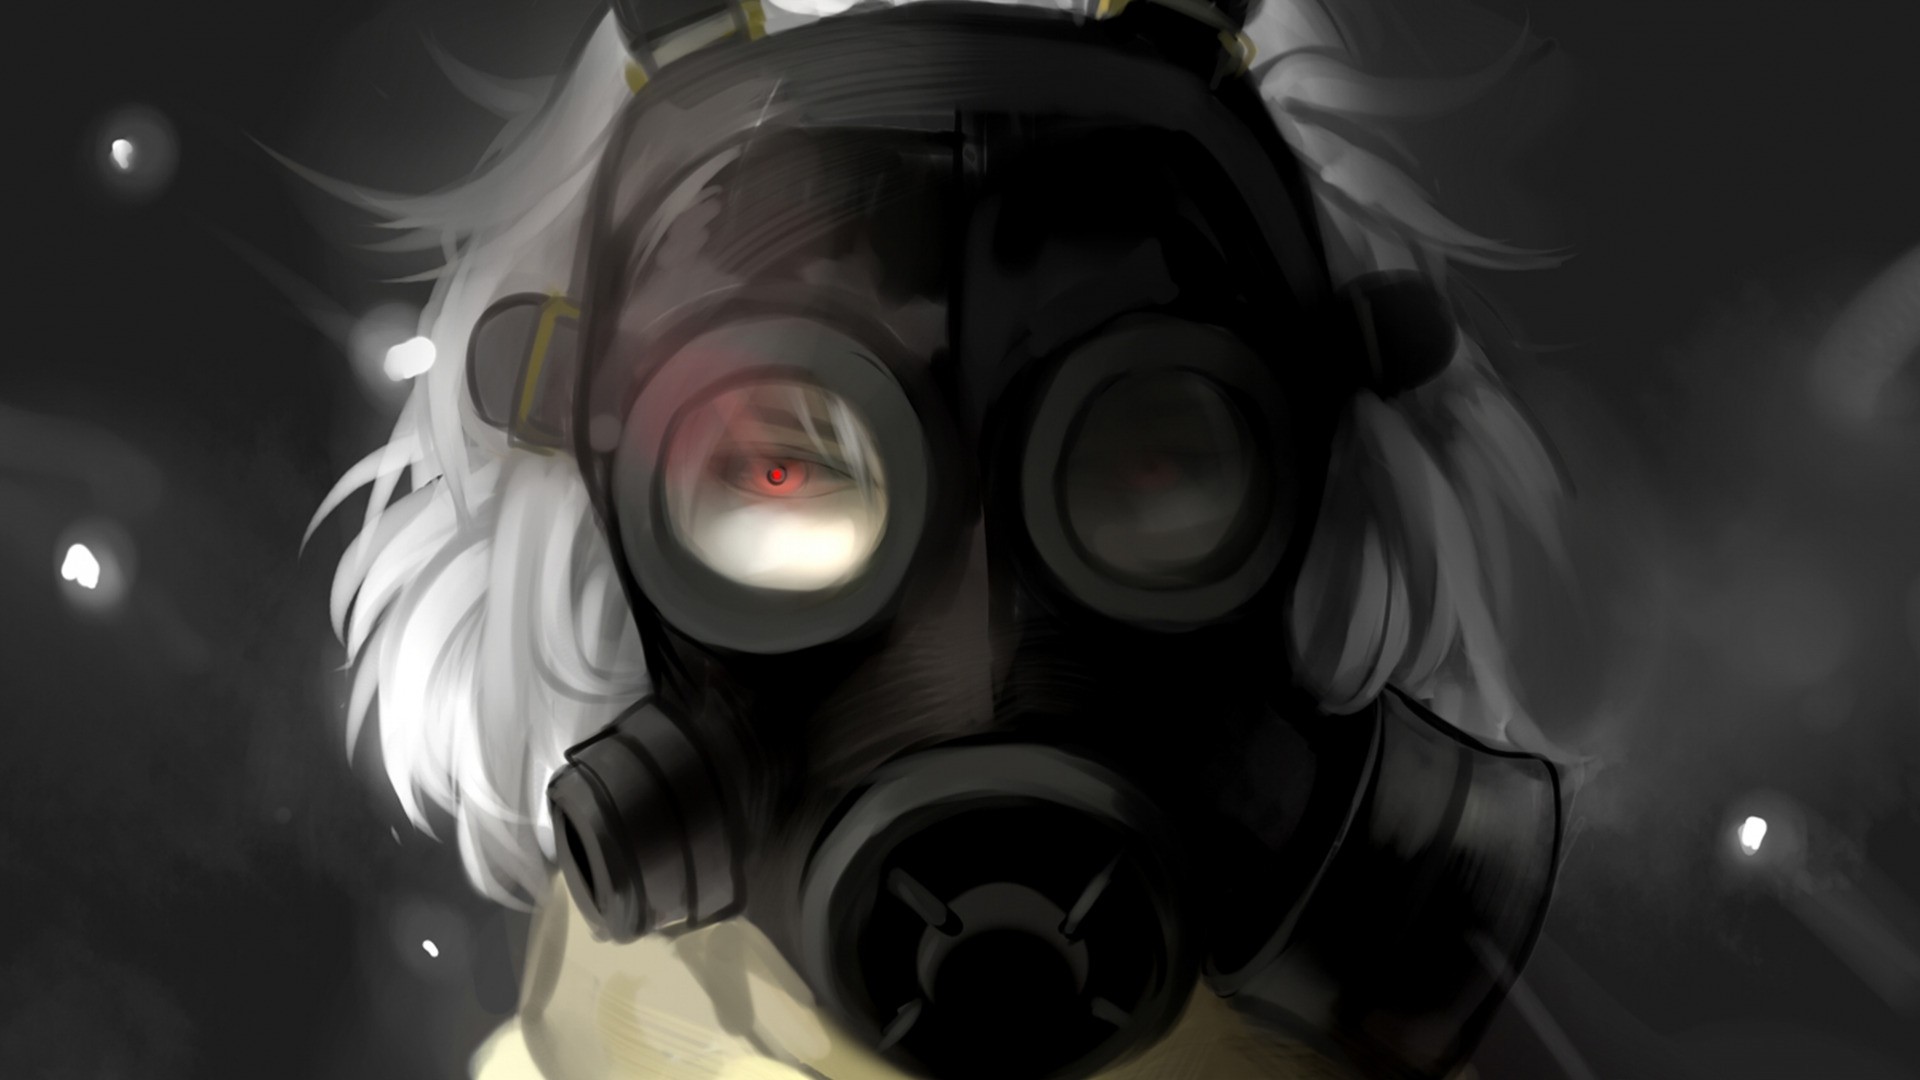 Anime Girl With Gas Mask a wallpaper